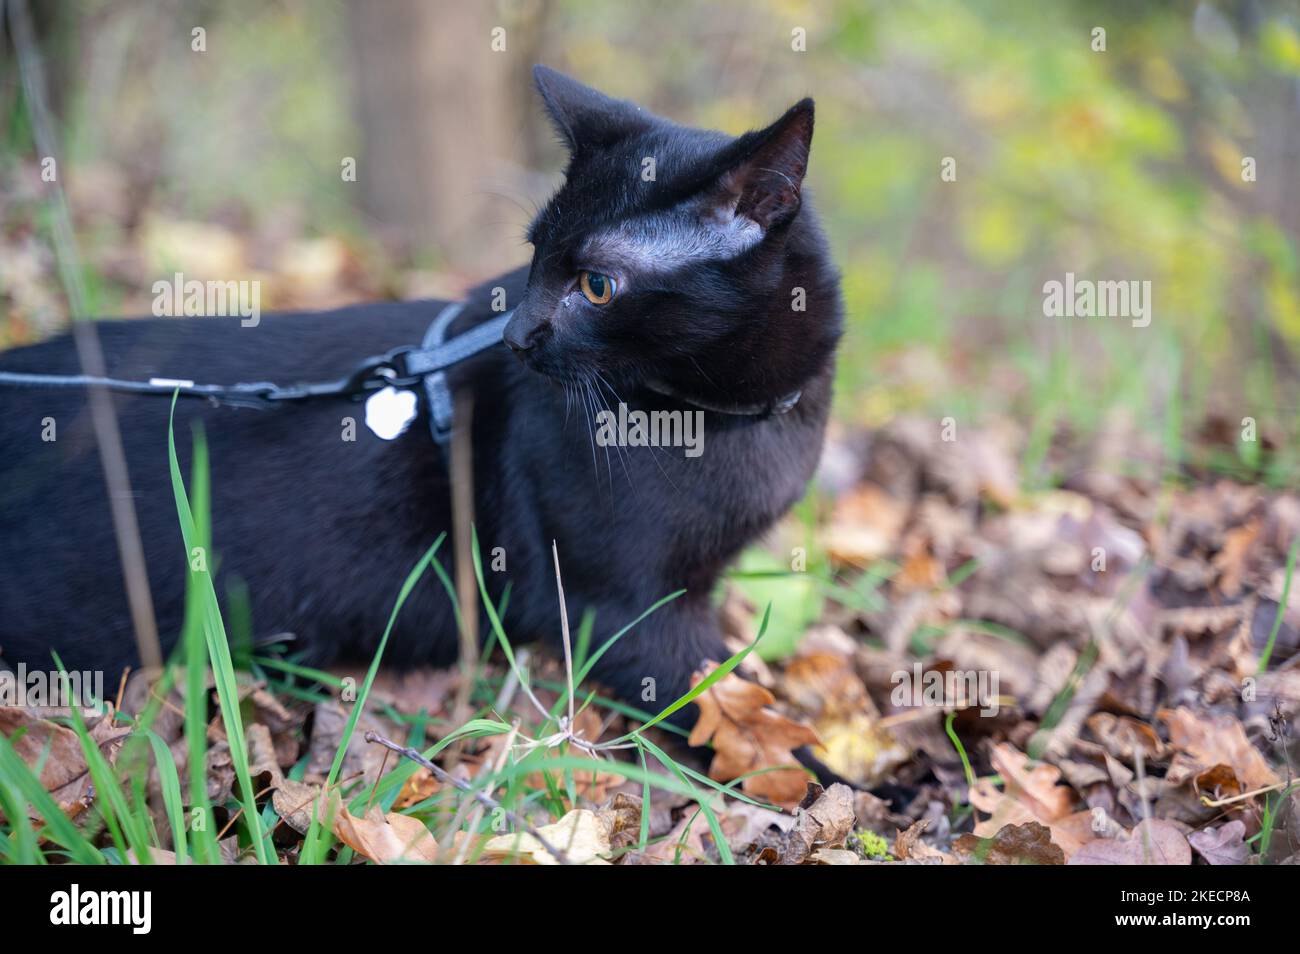 A black cat on a leash in nature at autumn time Stock Photo